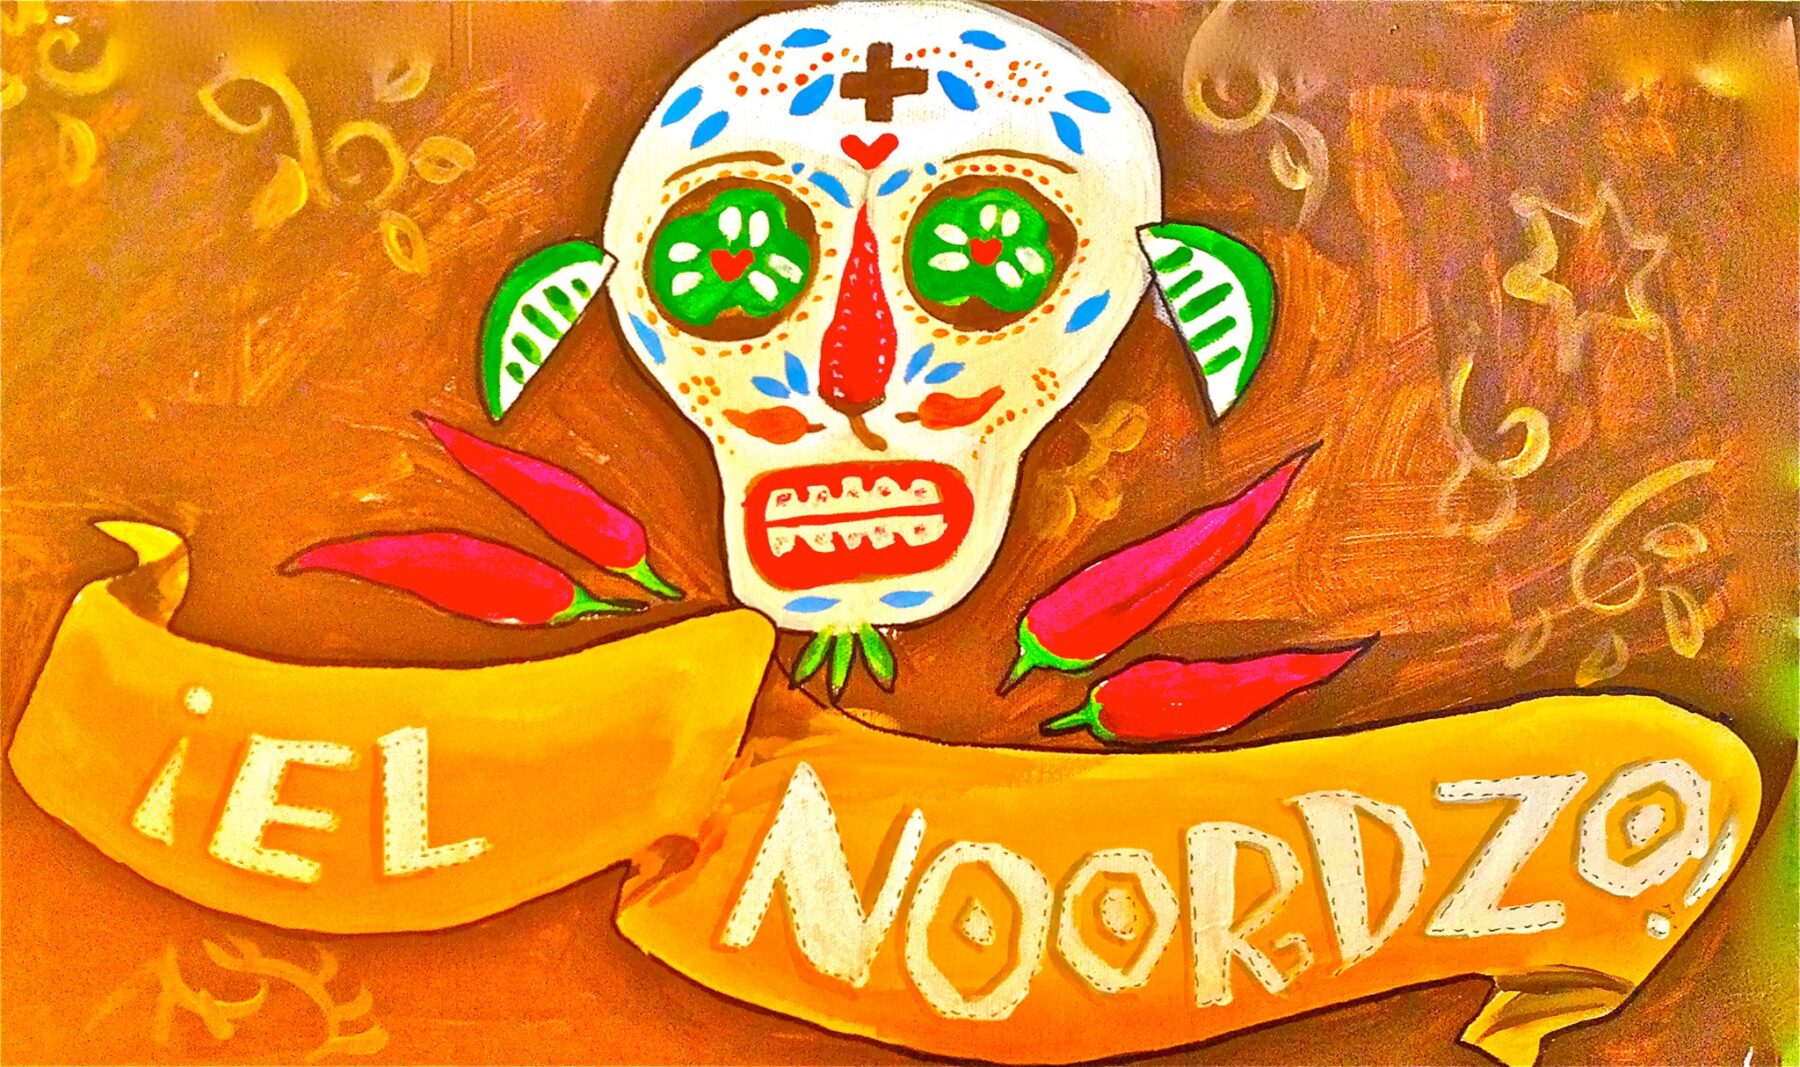 A Day of the Dead style skill with chilis and limes and a banner with the words "El Noordzo" across the bottom.